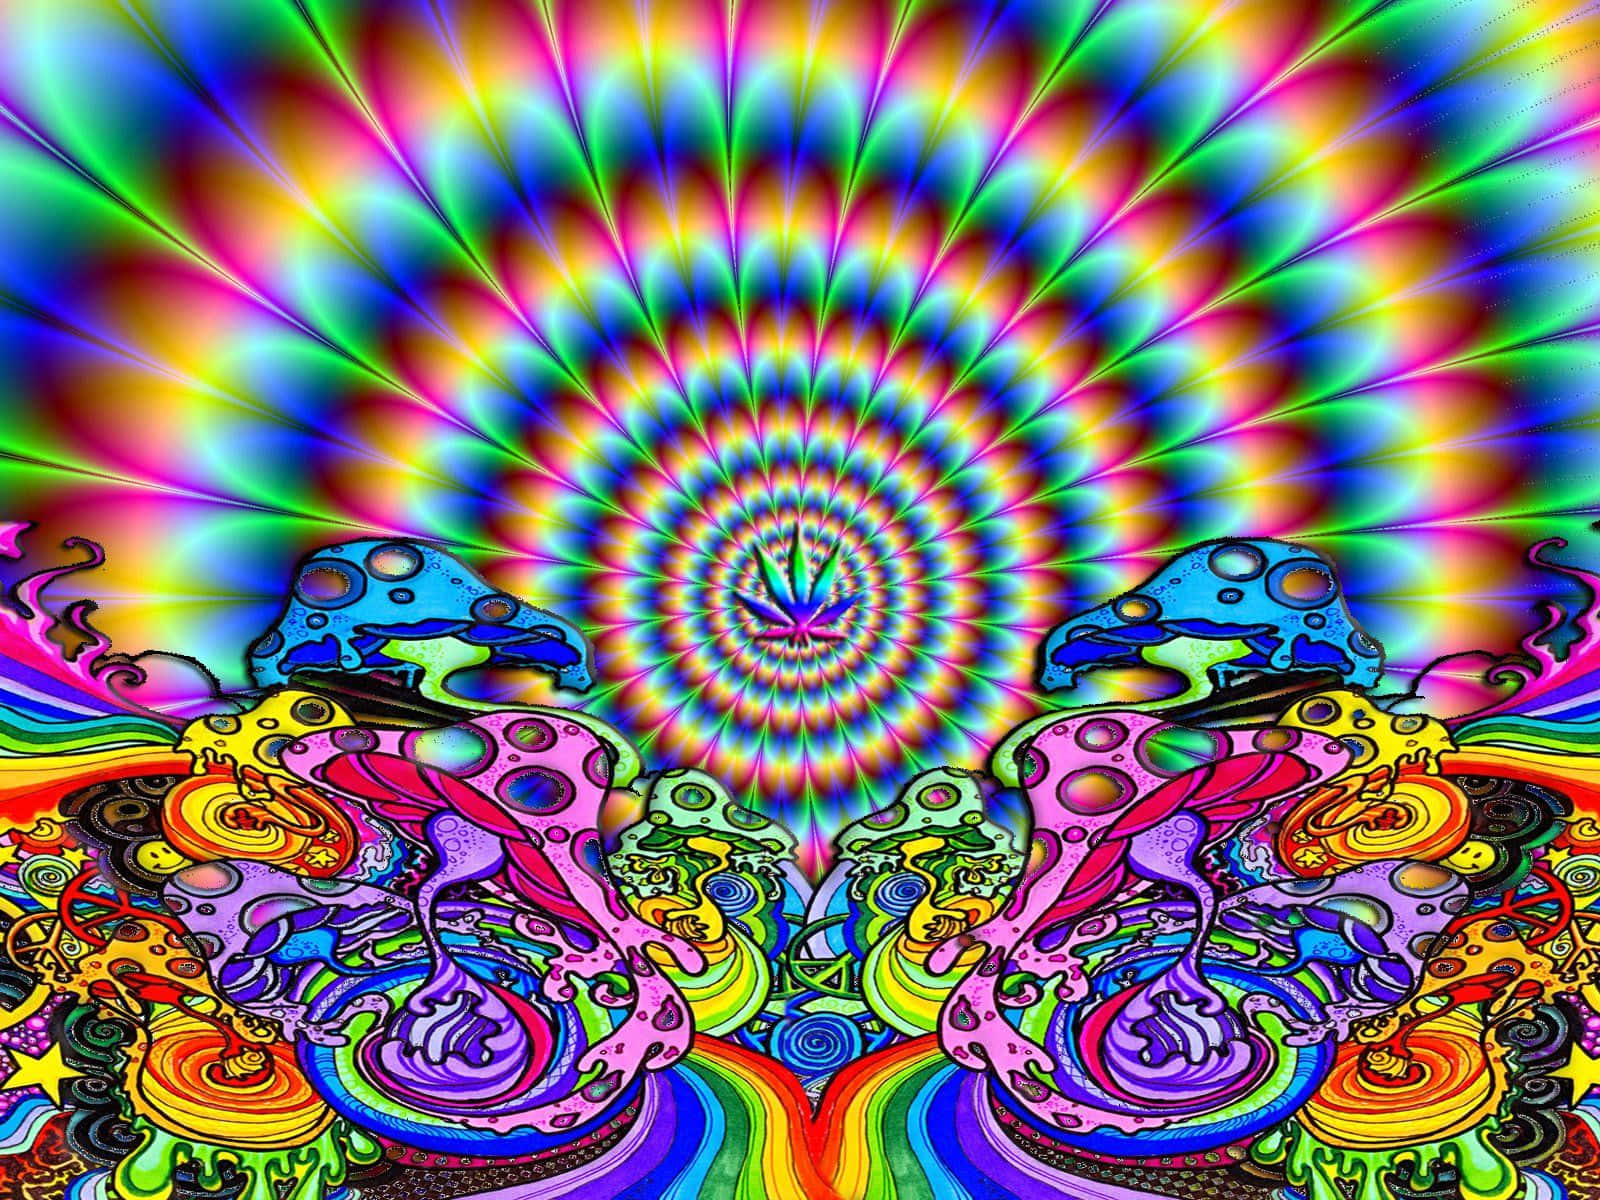 Step into the psychedelic world with a trippy desktop Wallpaper